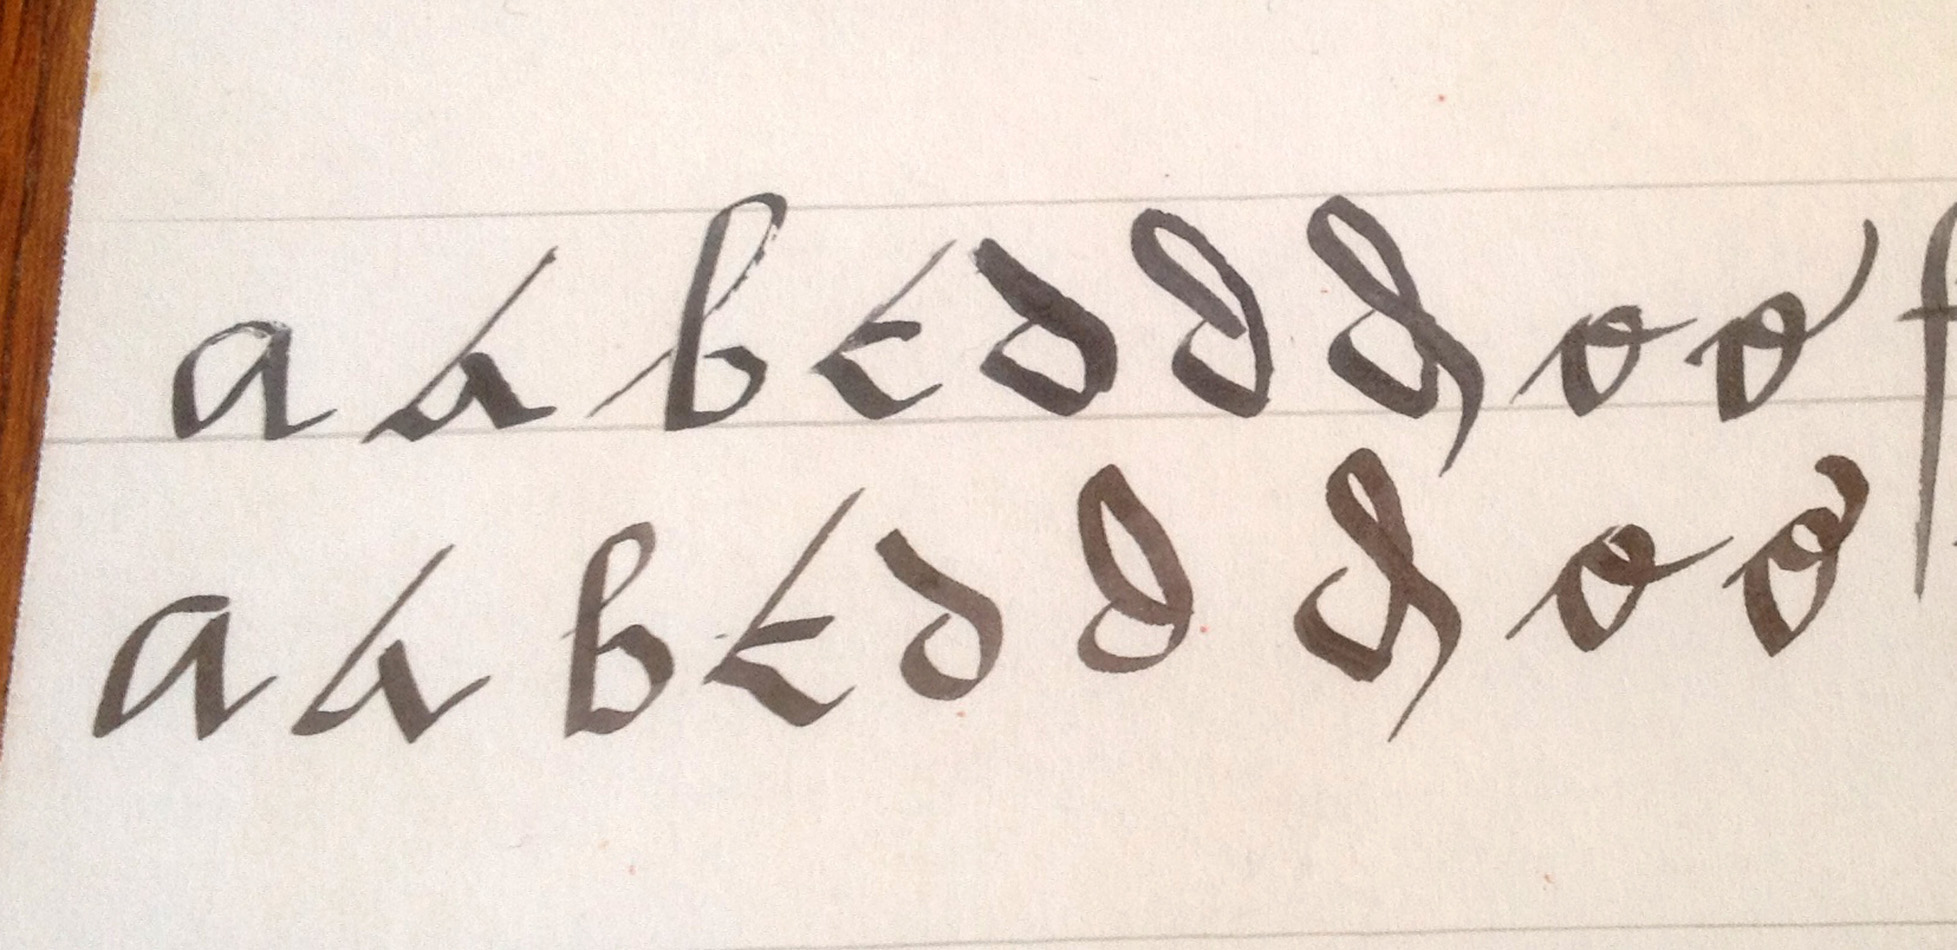 The first row of letters was written with our home-made iron gall ink and has a blue-black colour. The second row was written with a modern cartridge pen, and looks more brown in comparison.